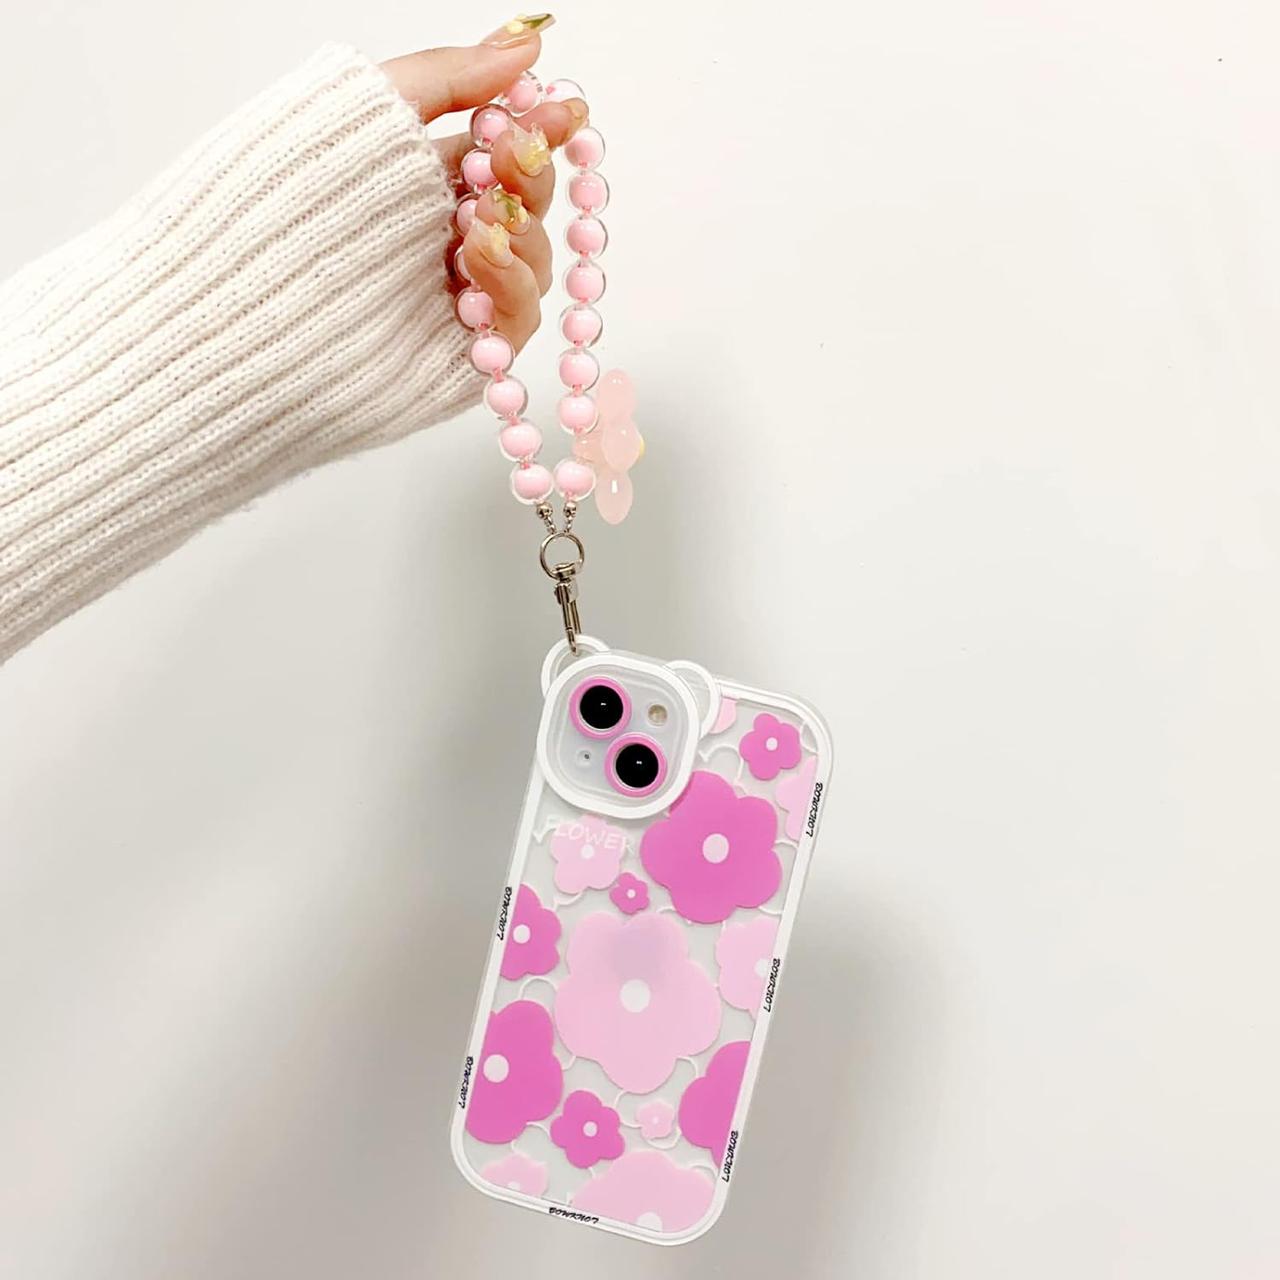 Pink Floral Pattern Transparent Silicon Case for iPhone With Phone Charm